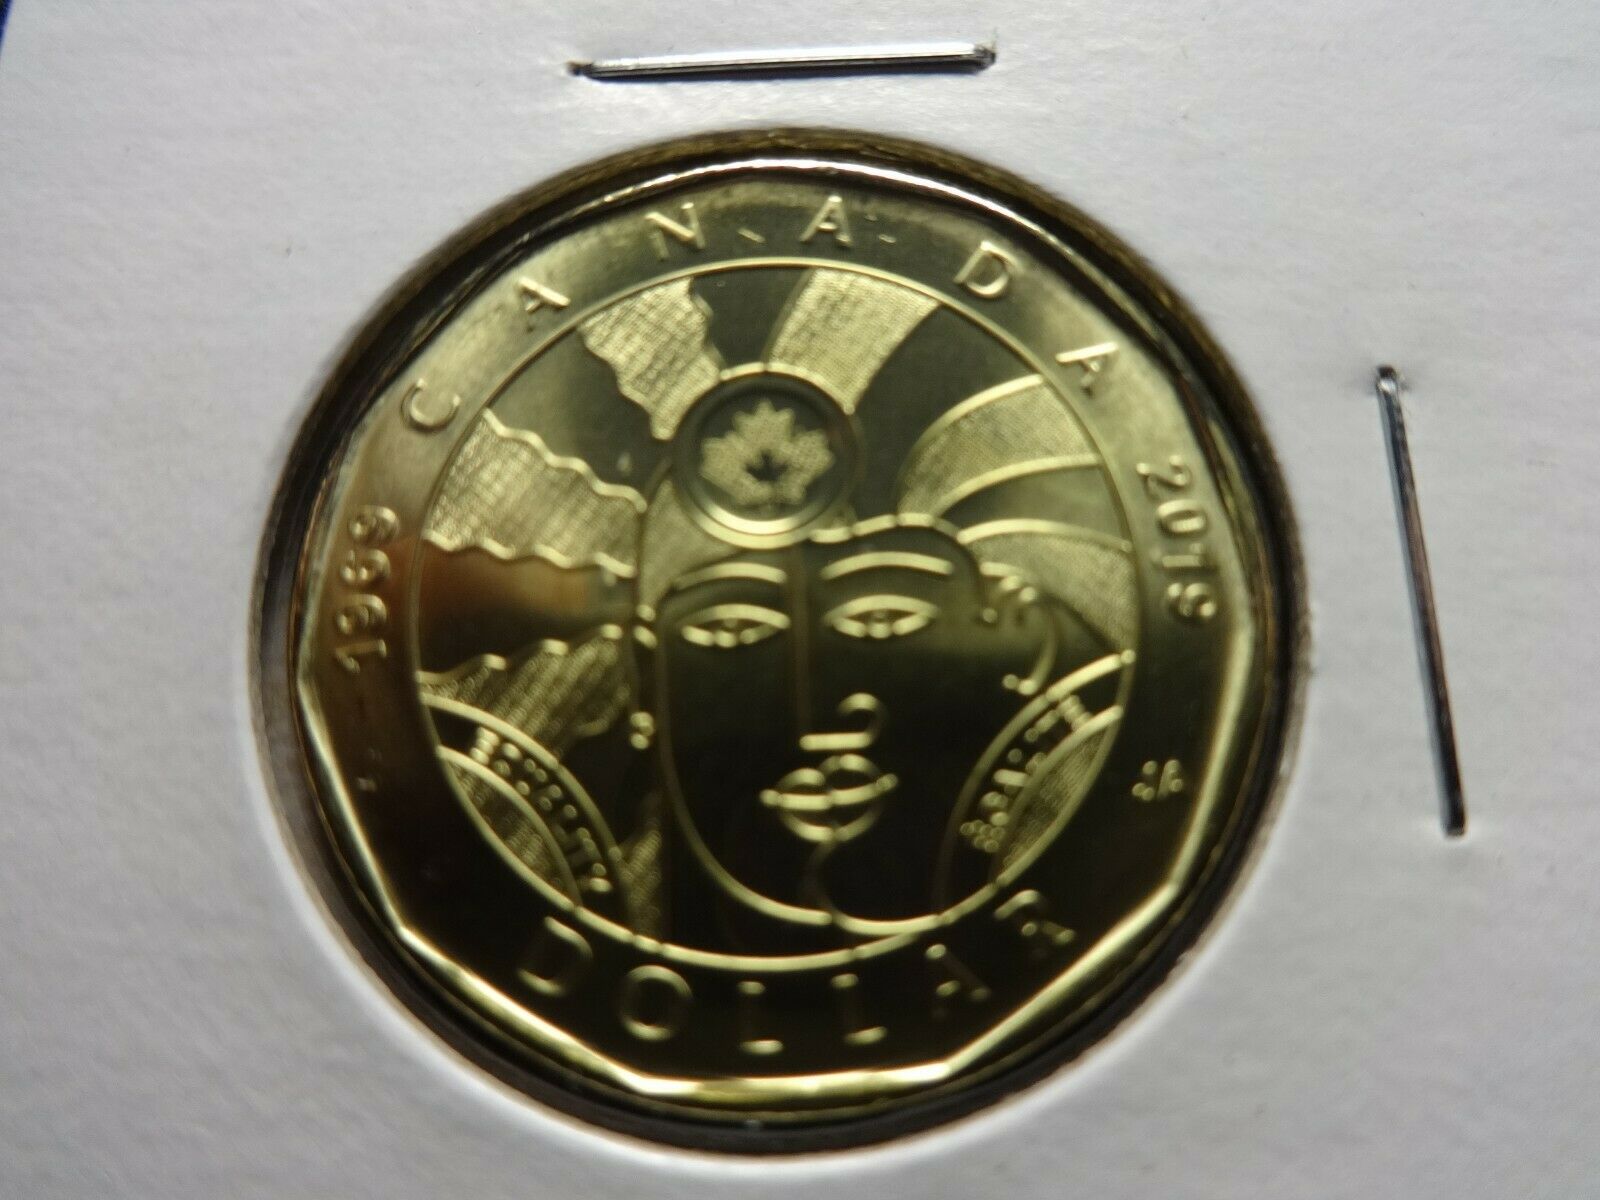 Canada 2019 1 Equality One 1$ Loonie Coin - Circle , HD Wallpaper & Backgrounds